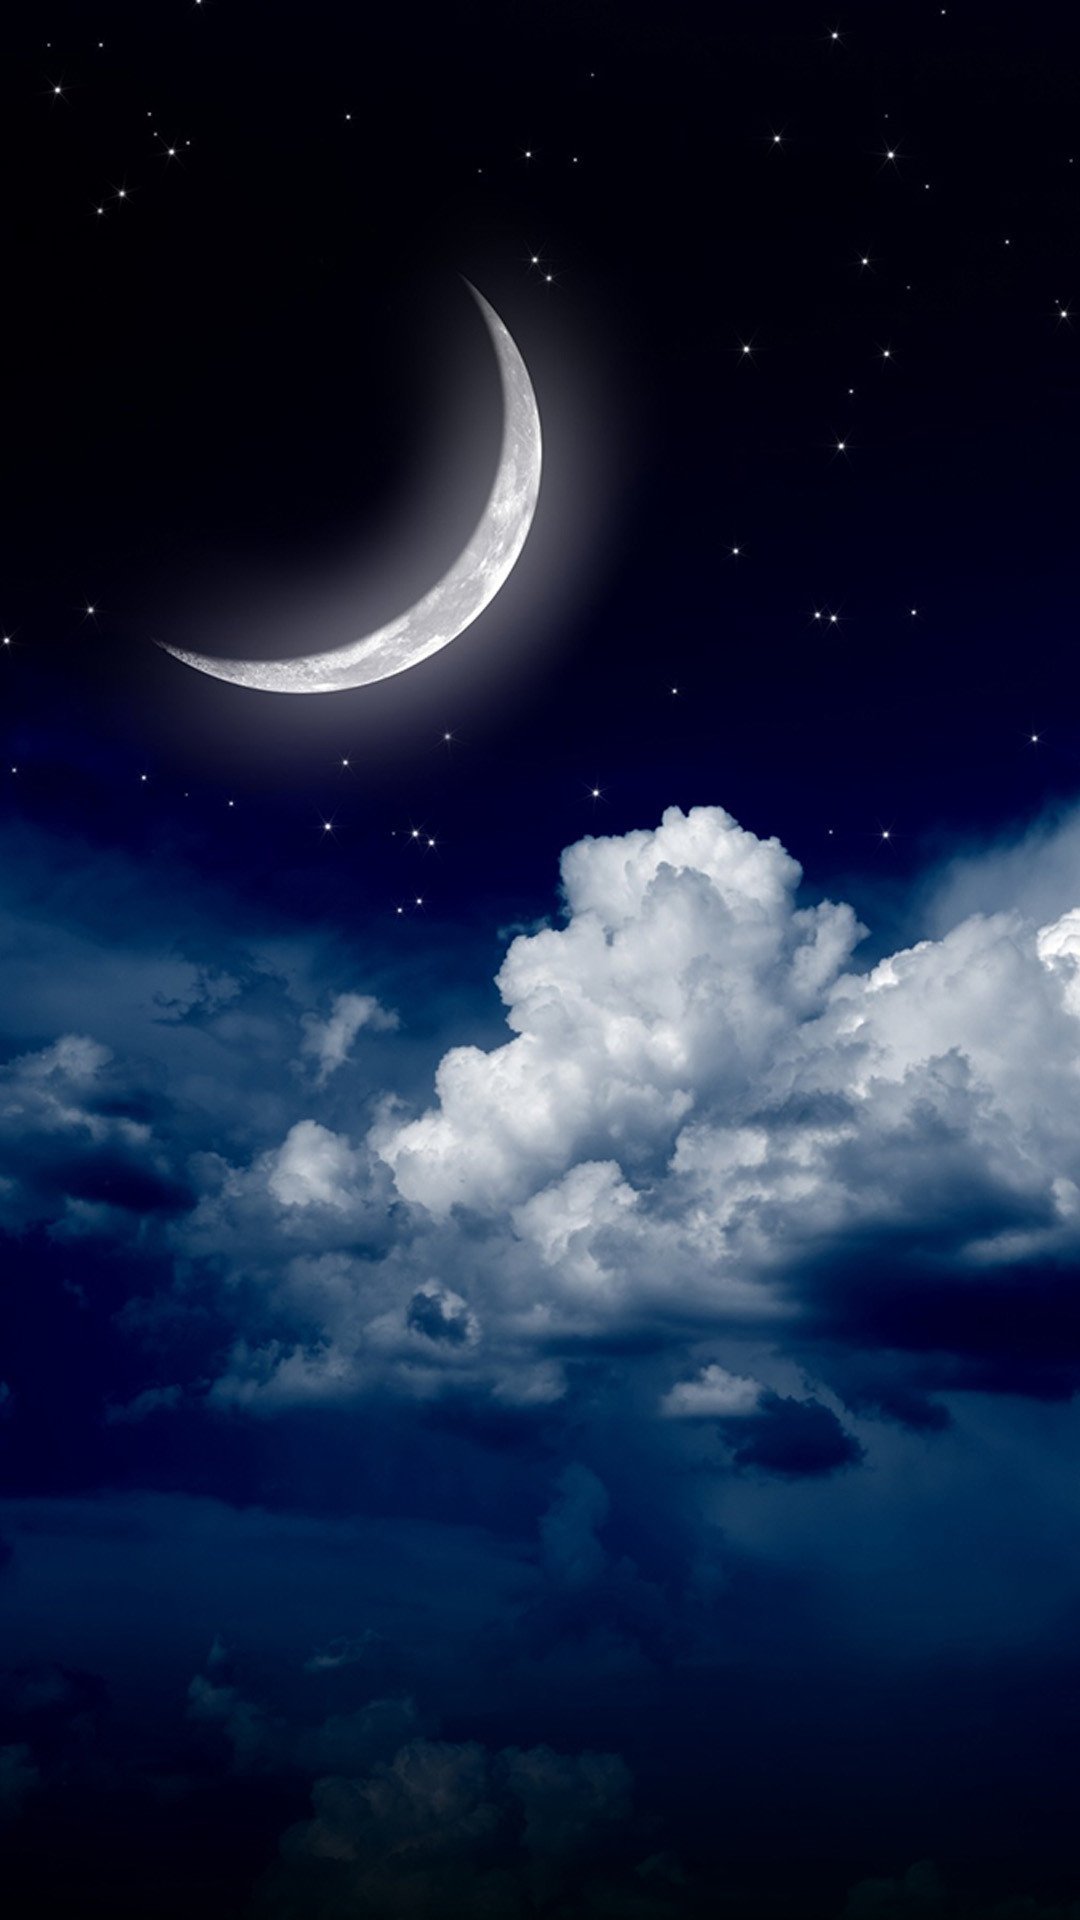 Sky clouds moon. iPhone wallpaper of night stars view and scenery. Tap to check